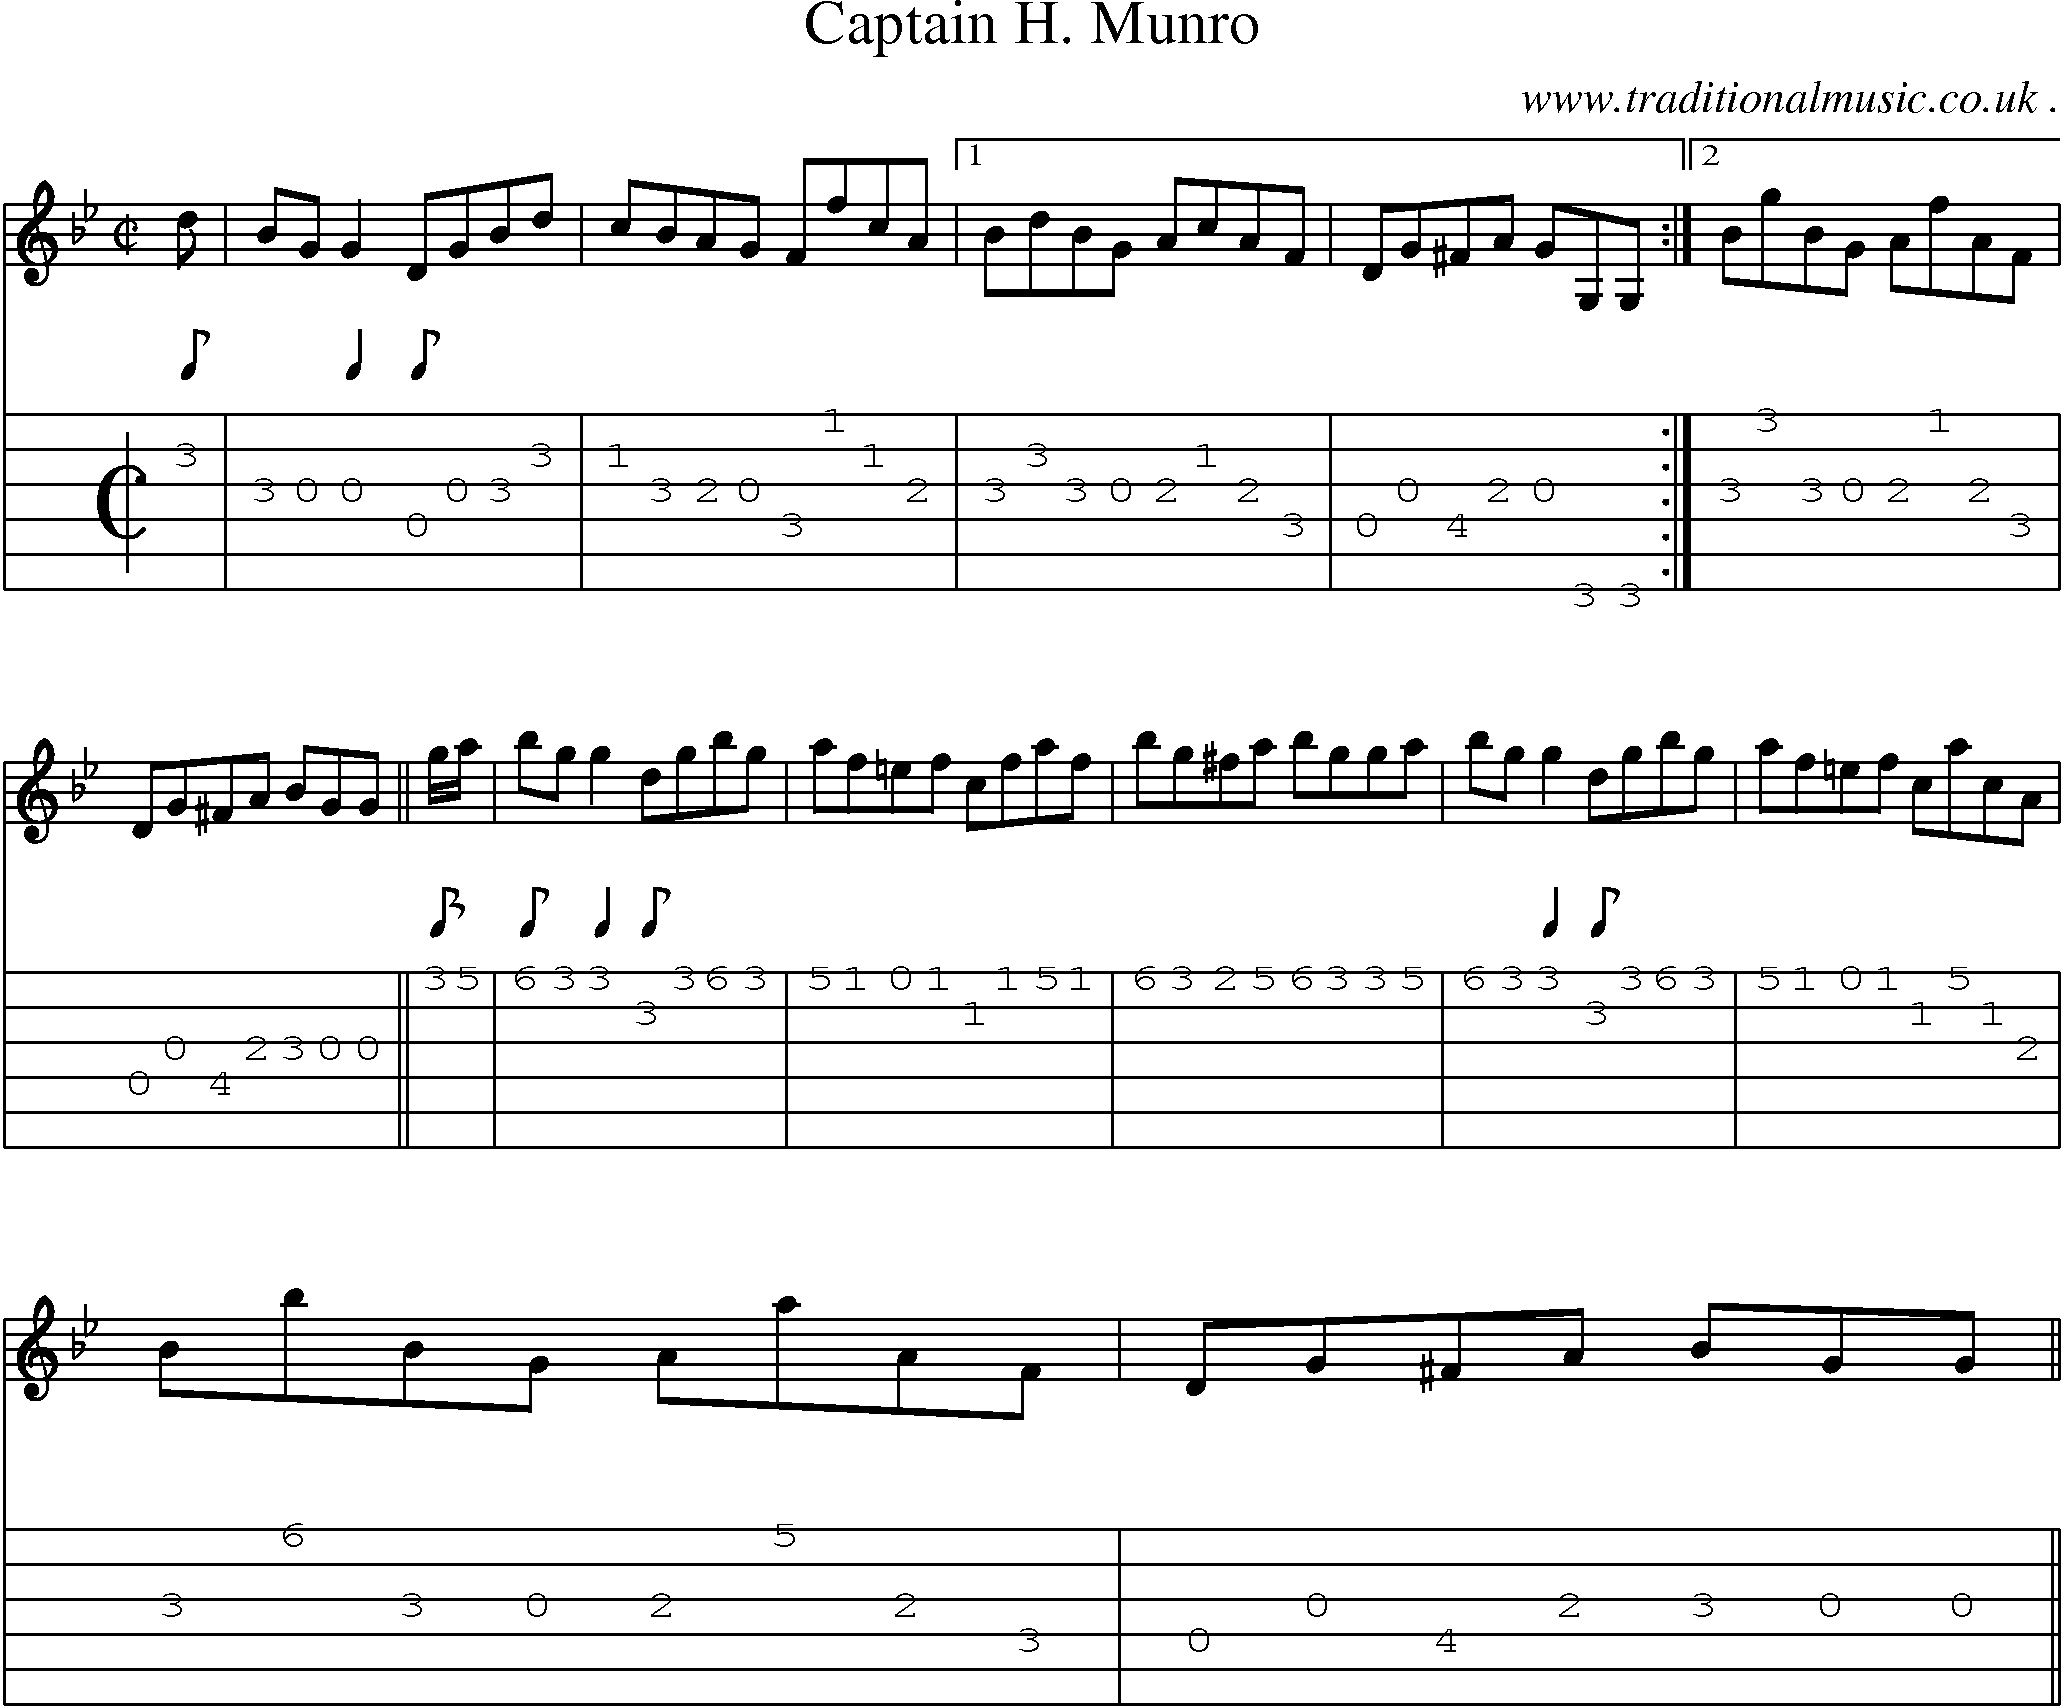 Sheet-music  score, Chords and Guitar Tabs for Captain H Munro